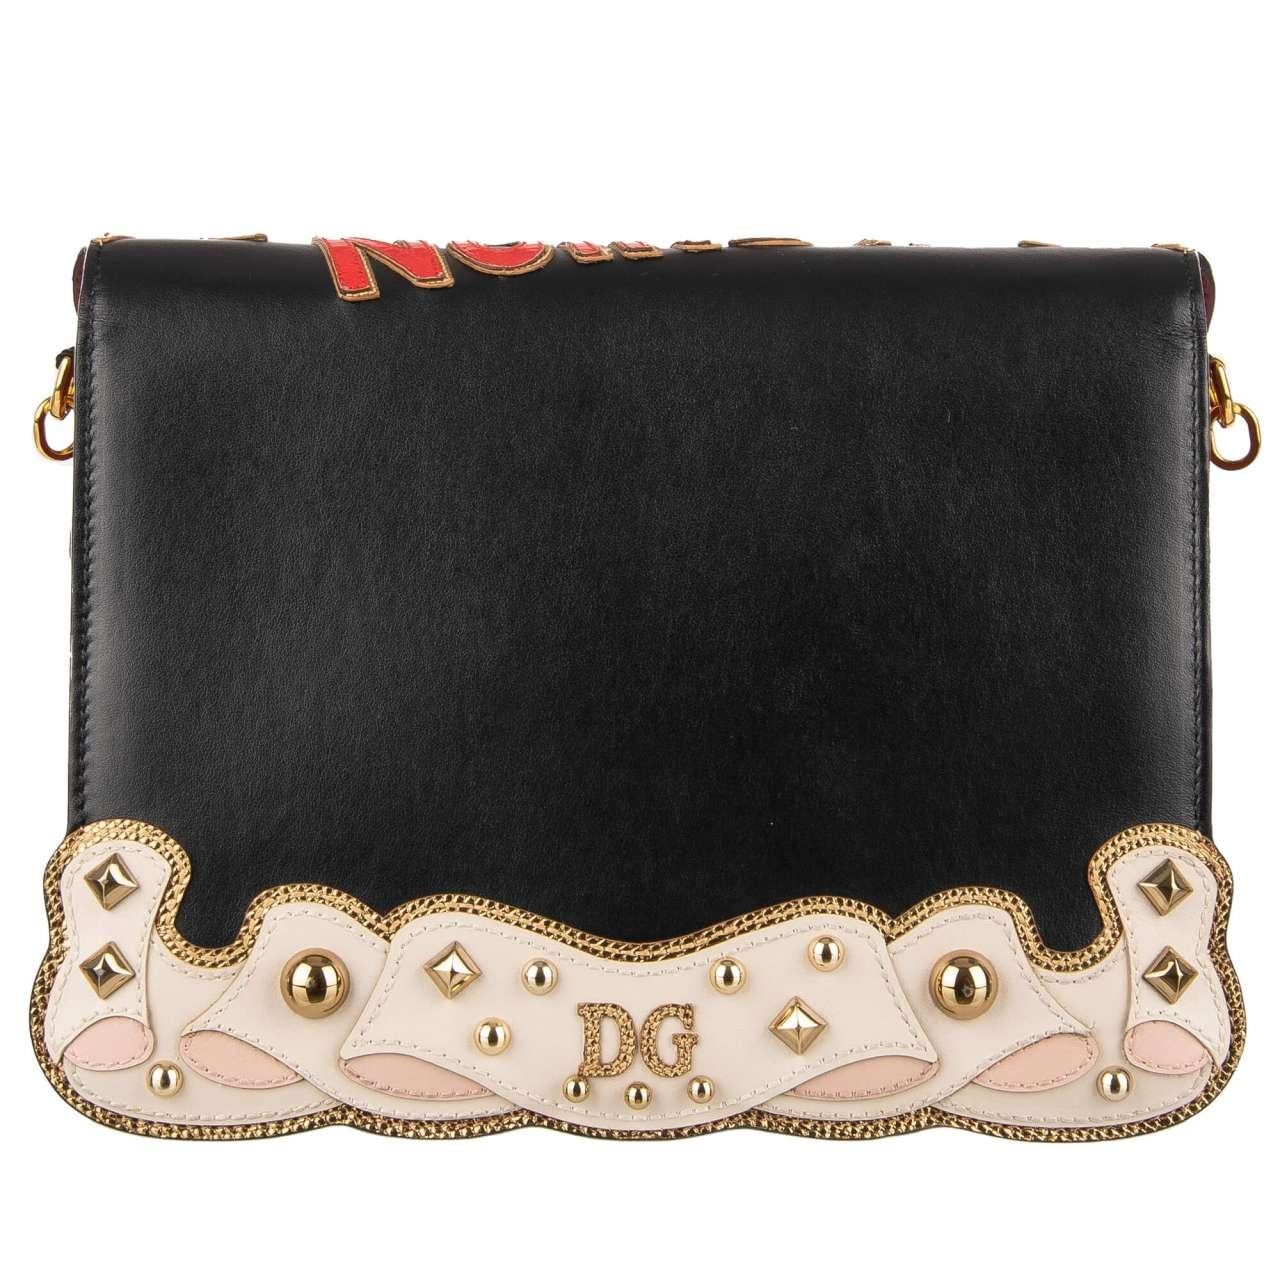 Dolce & Gabbana Shoulder Bag LUCIA Fashion Sinner with Crystals and Studs Black For Sale 1